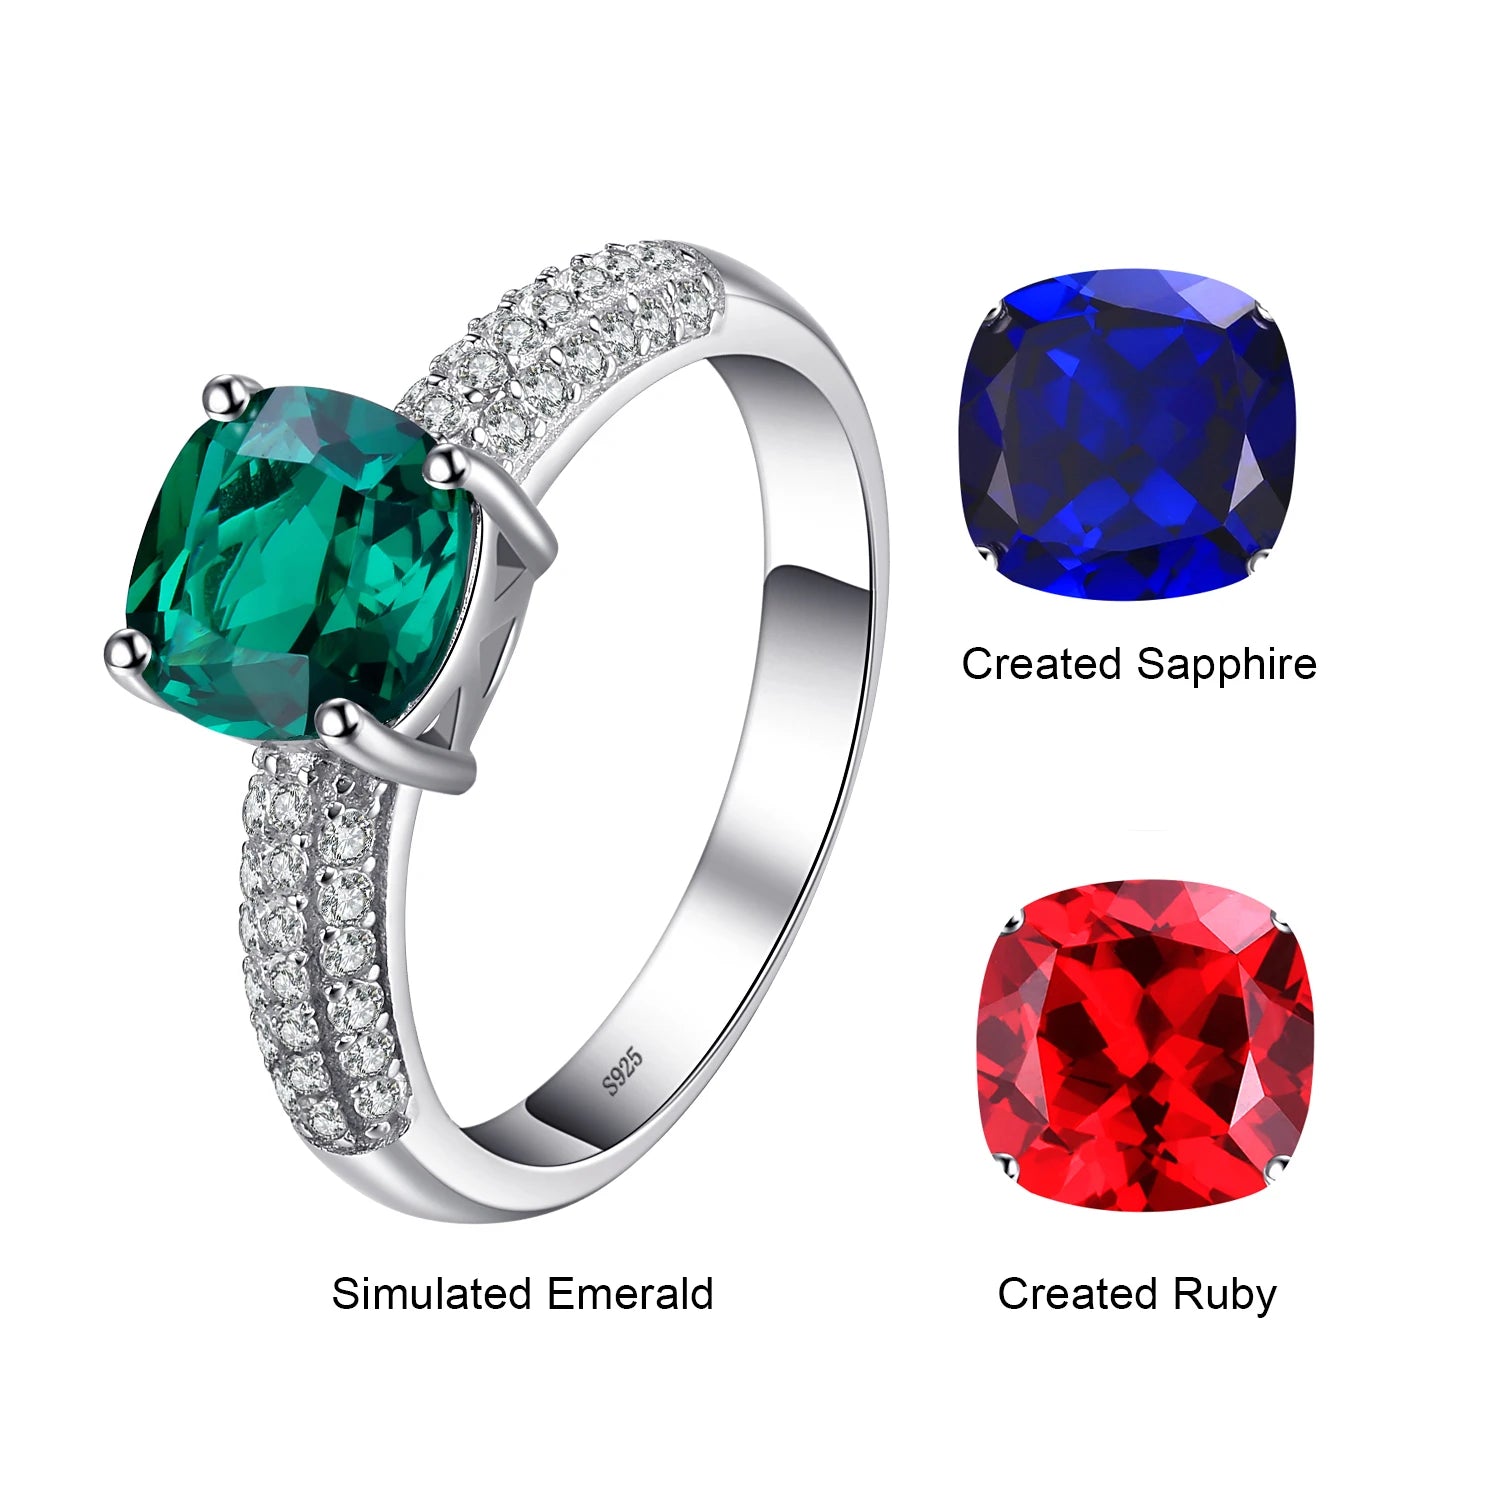 Green Simulated Nano Emerald Created Ruby Ring 925 Sterling Silver Gemstone Solitaire Engagement Rings for Women